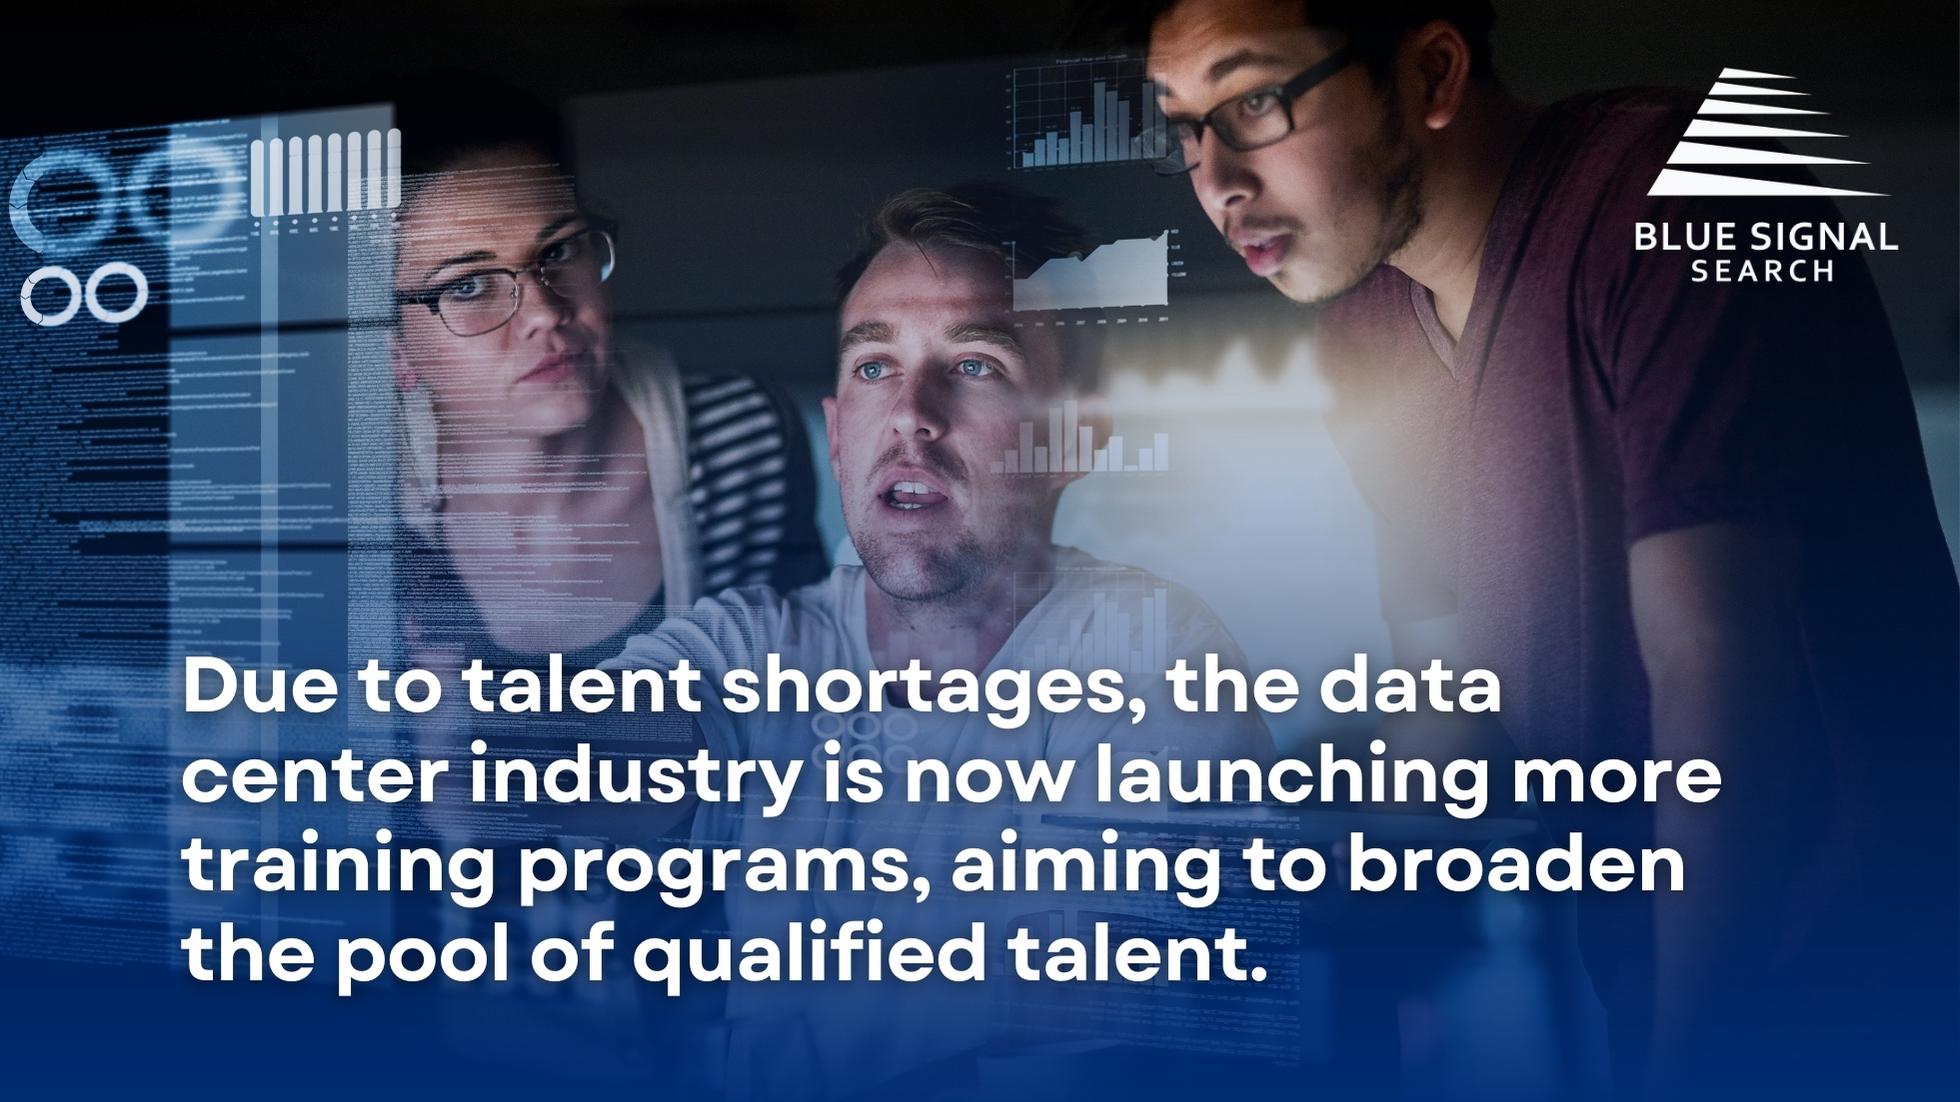 A team of data center developers training for their new jobs in a data center, with a text overlaying it about the industry increasing training programs due to job shortages